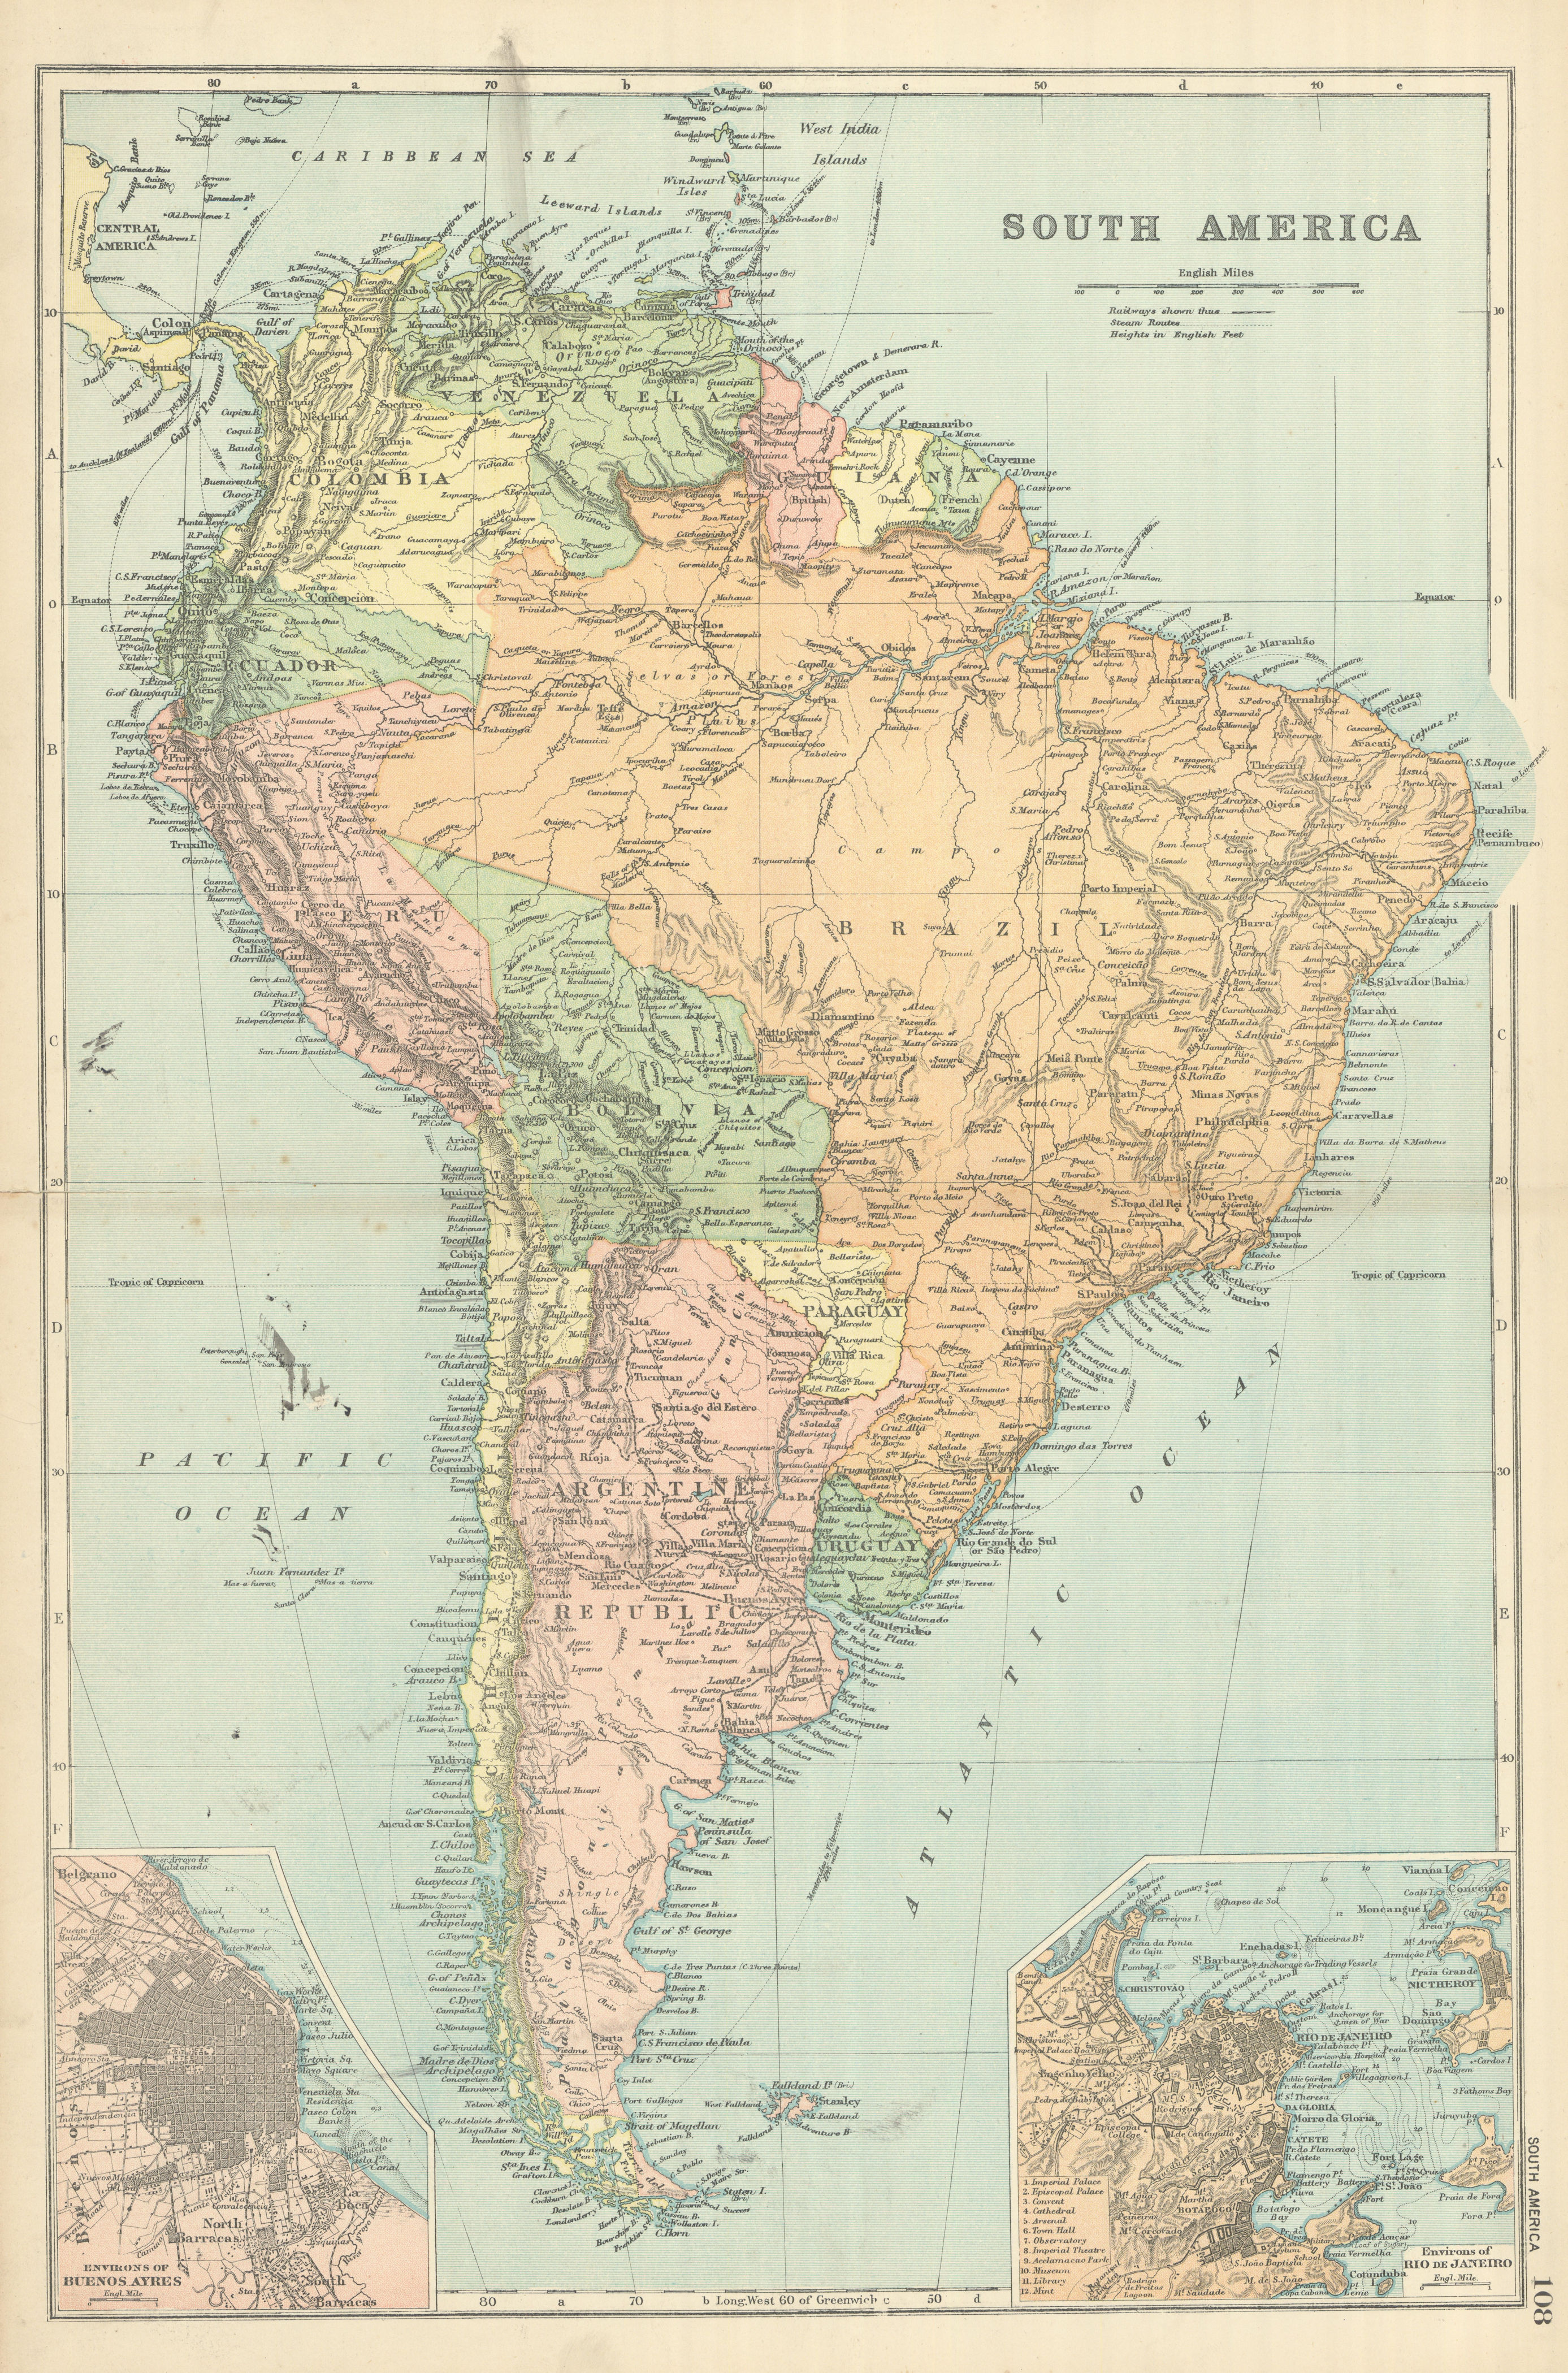 Associate Product SOUTH AMERICA Brazil Argentina Chile Peru Ecuador by GW BACON 1898 old map